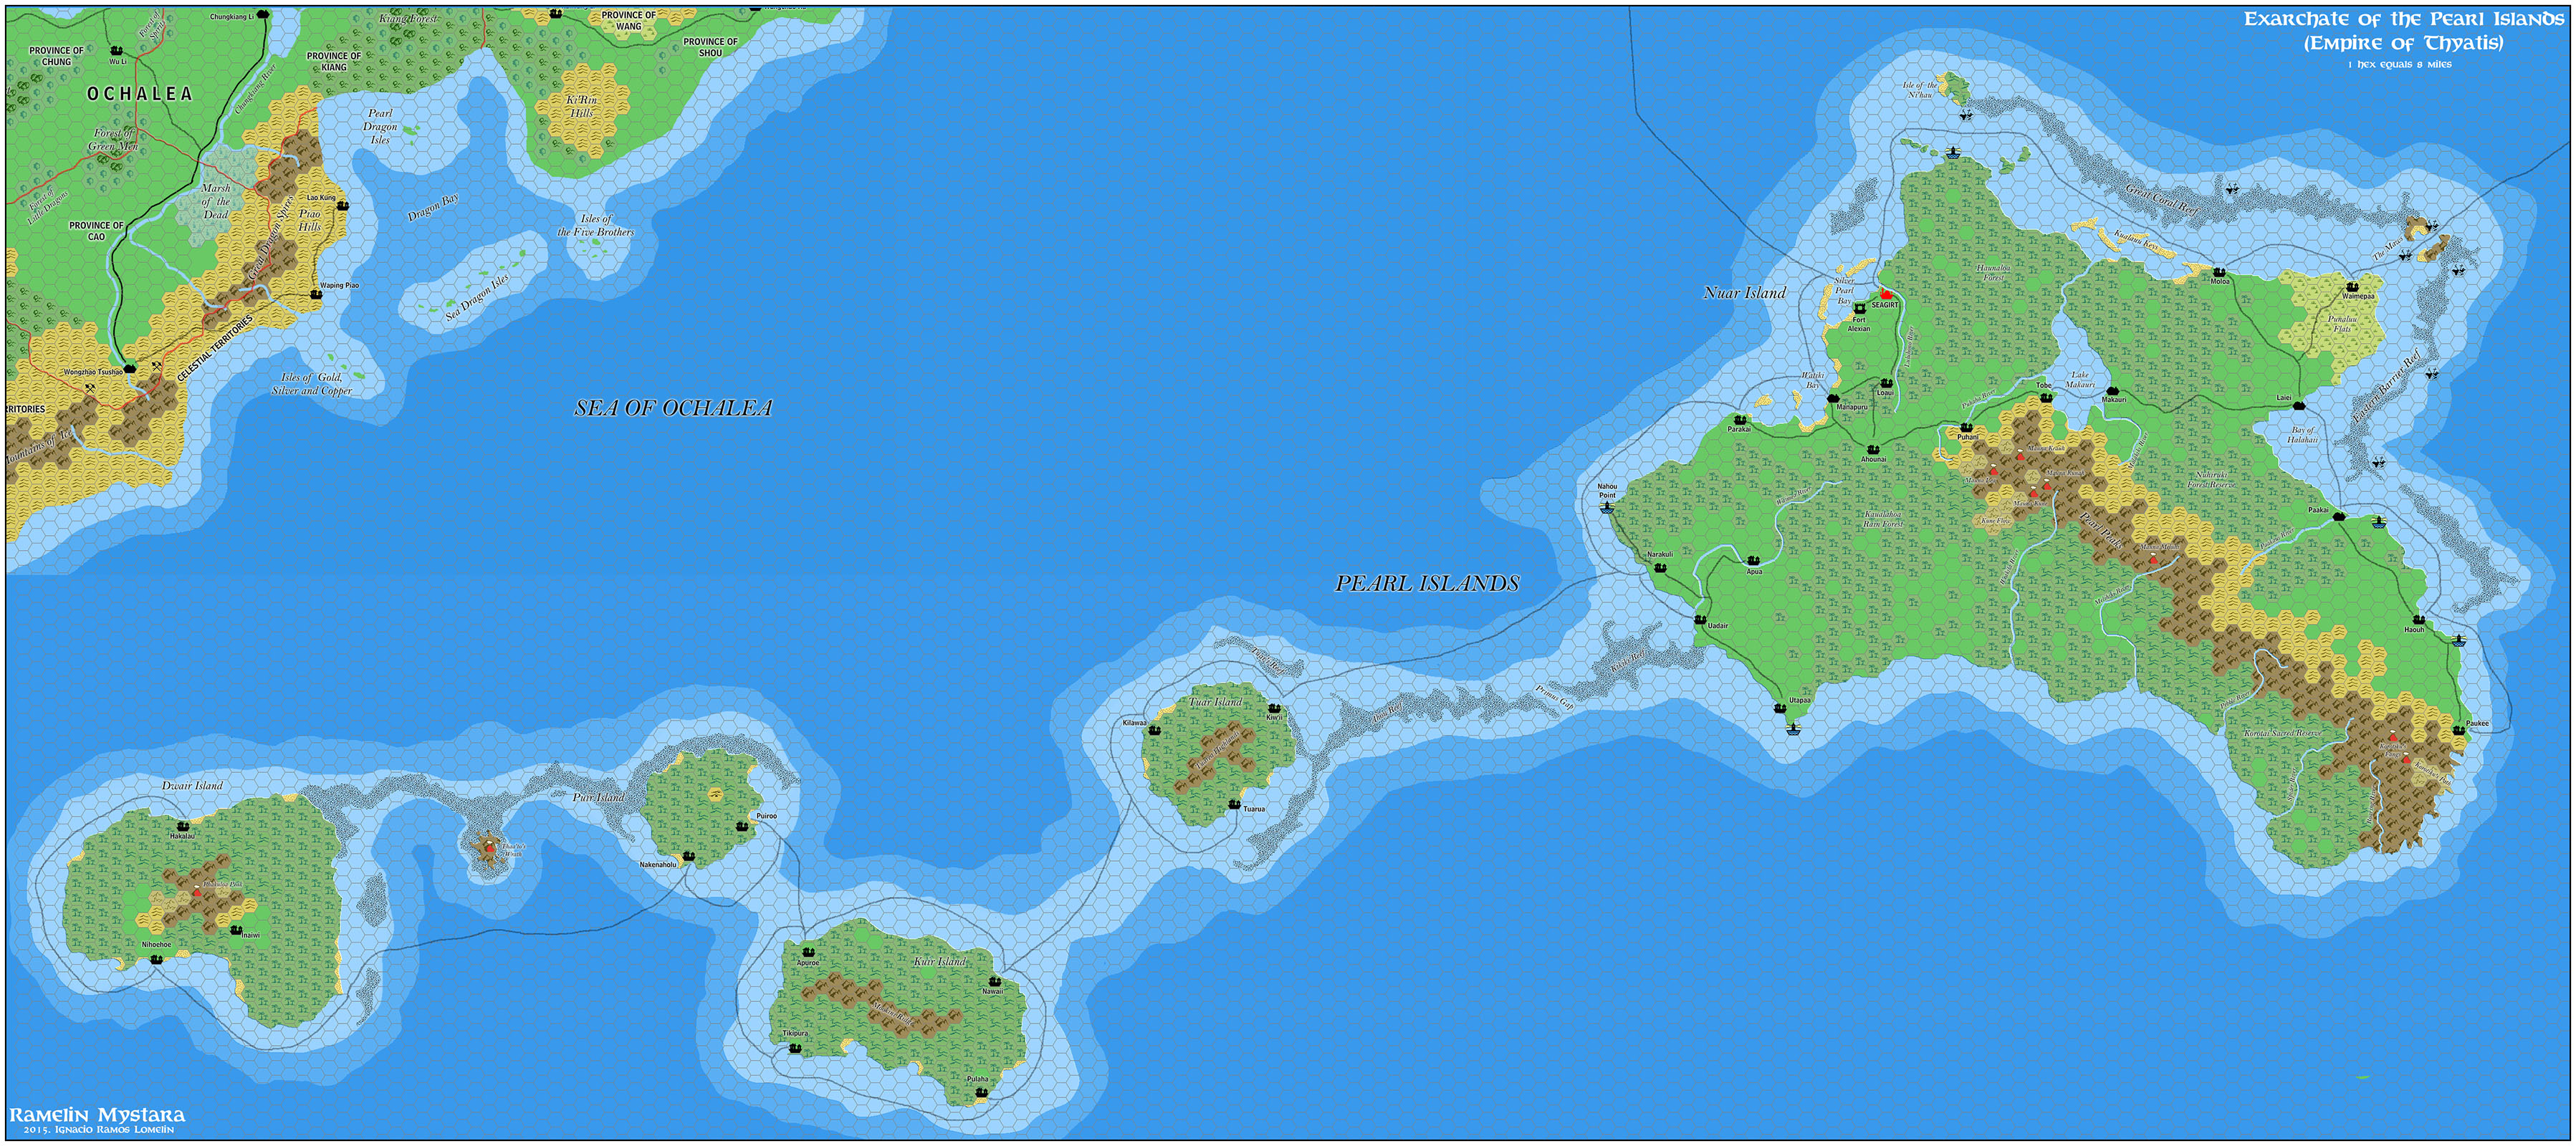 The Exarchate of the Pearl Islands, 8 miles per hex by Jose Ignacio Ramos Lomelin, November 2015 (Version 1)